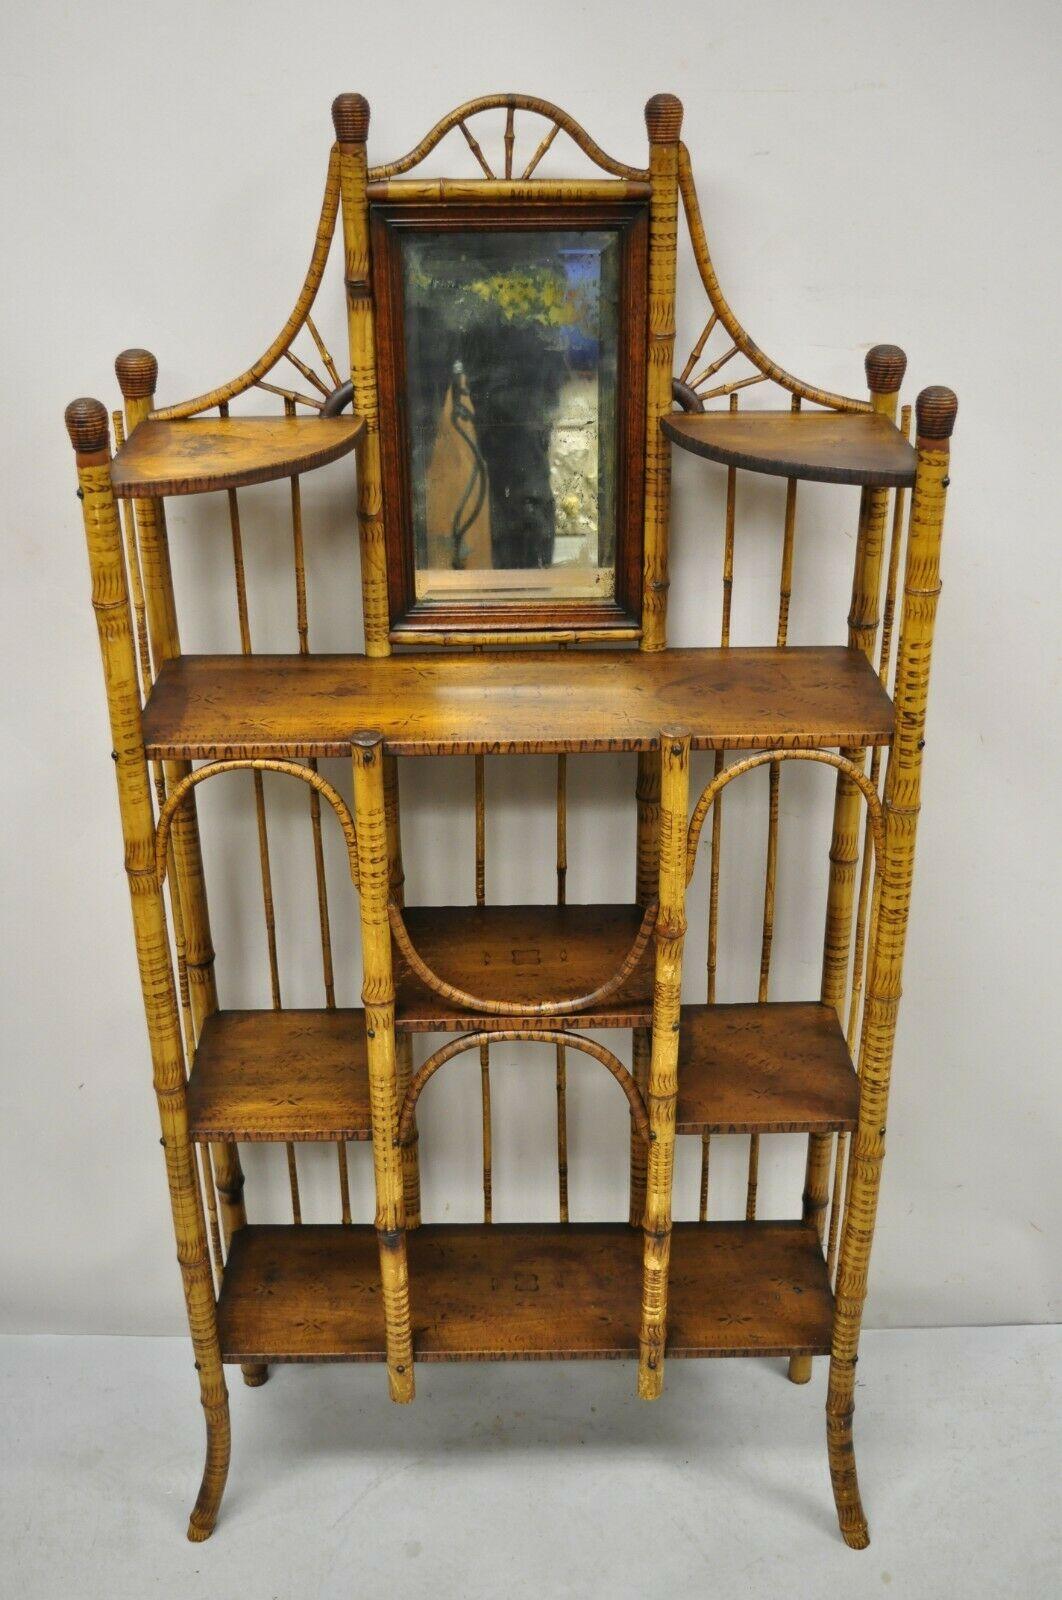 19th C. English Victorian Bamboo Stick and Ball Curio Shelf Display Etagere For Sale 7